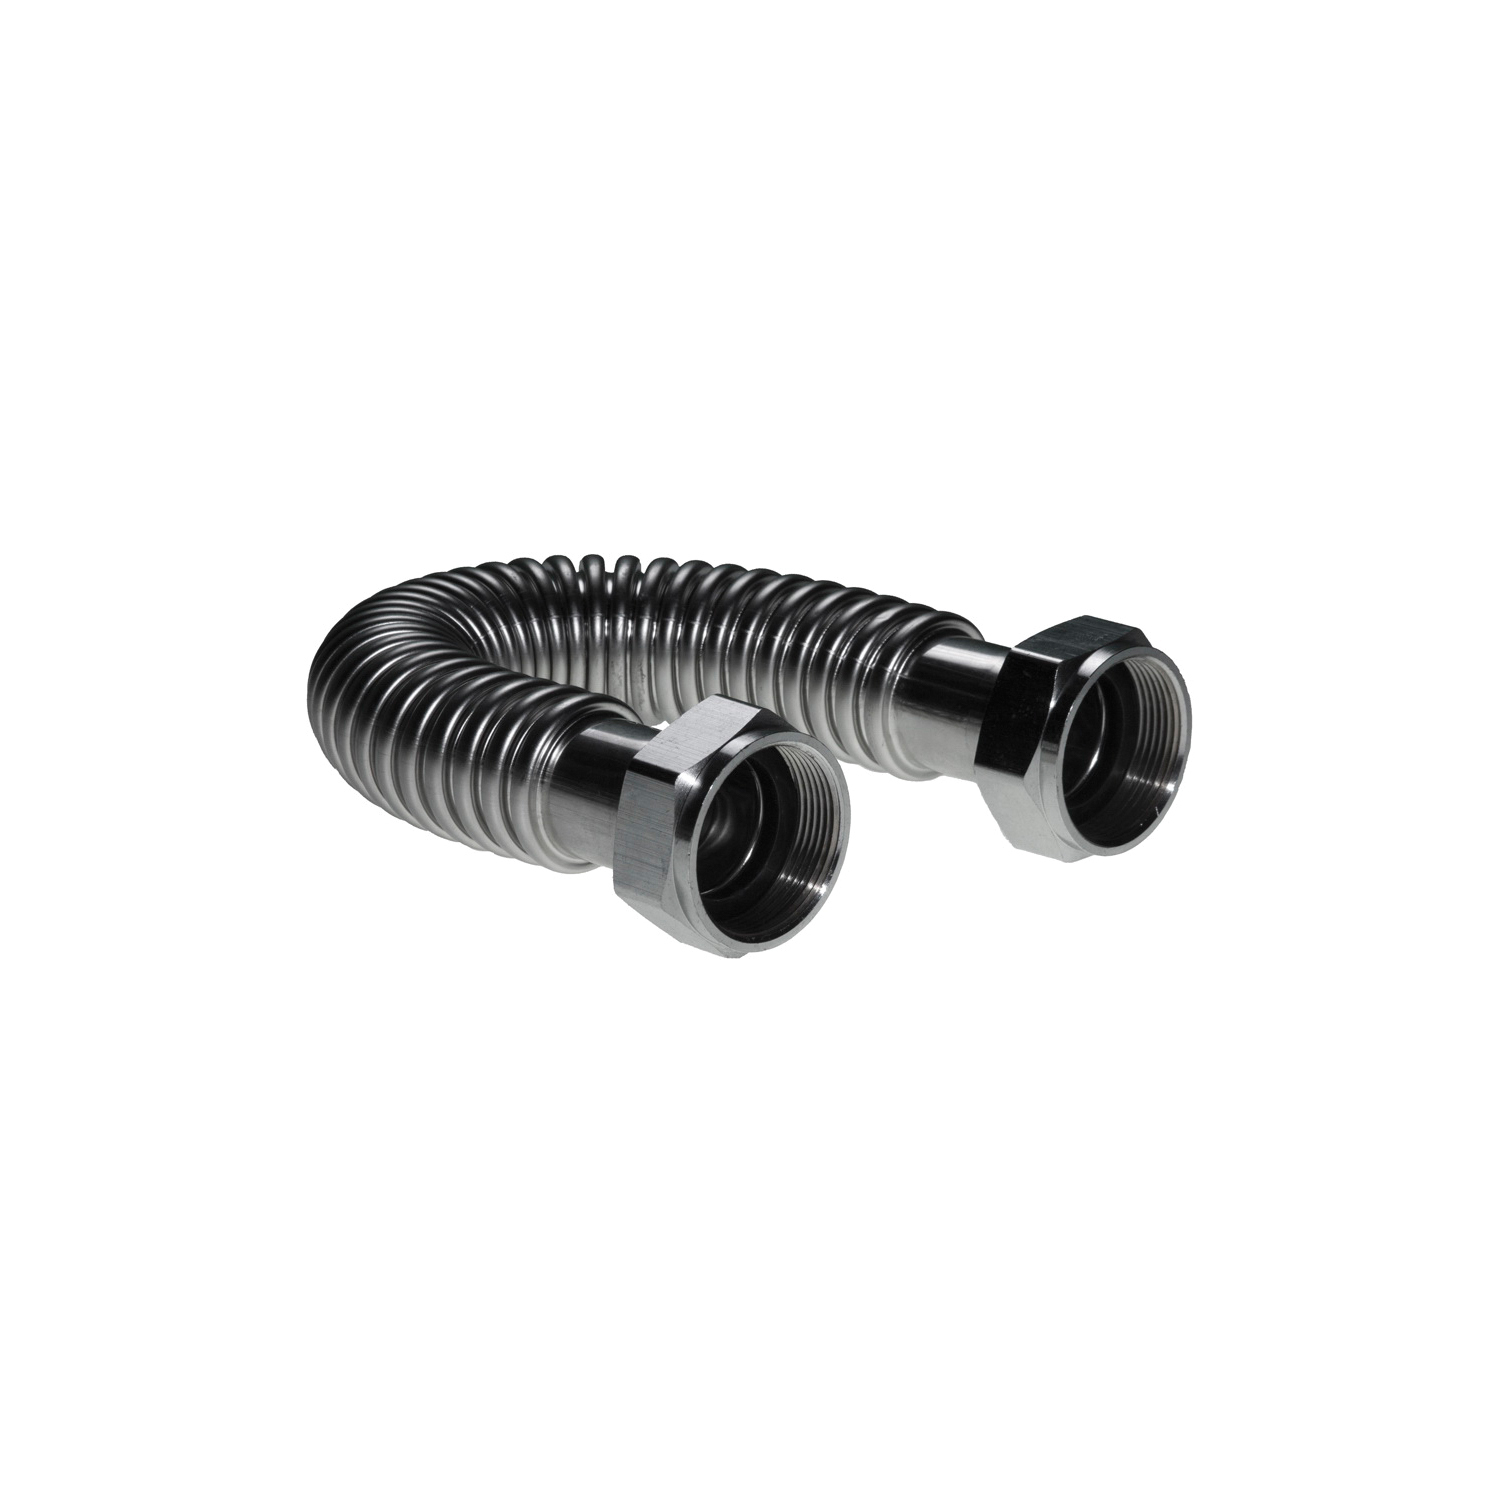 Falcon Stainless SWC112-18 Flexible Boiler Connector, FNPT 1-1/2 in Inlet, FNPT 1-1/2 in Outlet, Stainless Steel